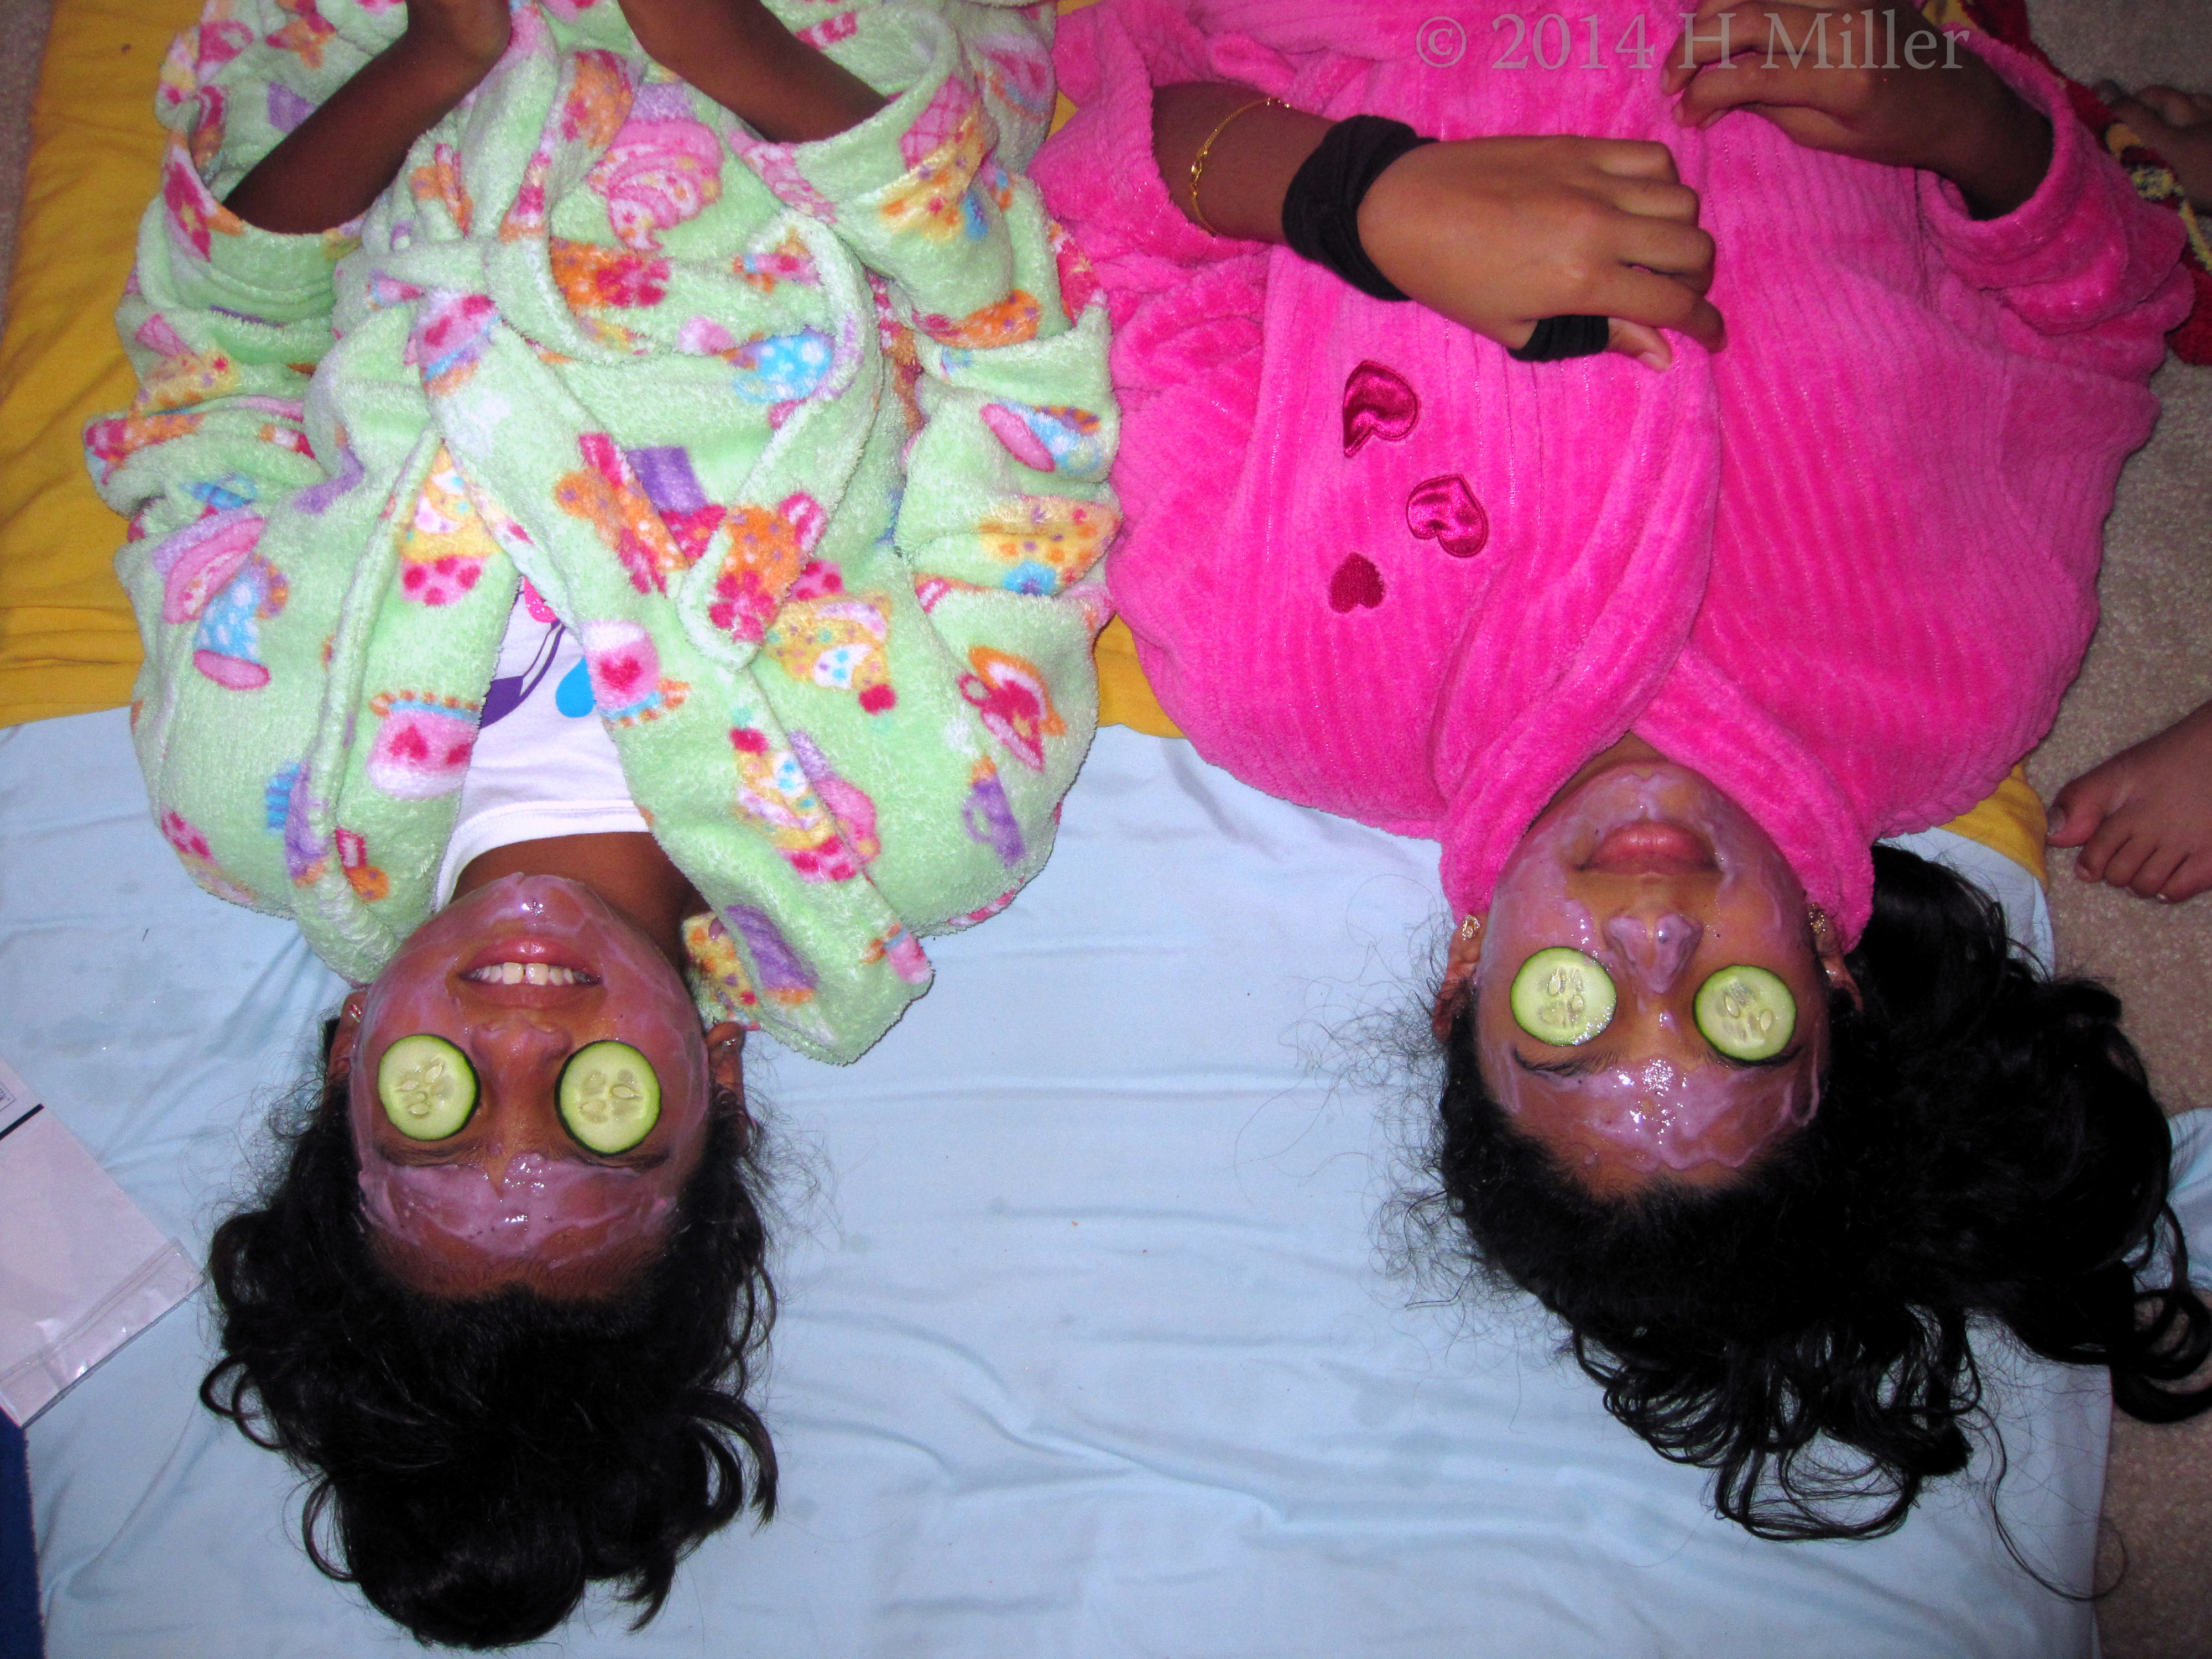 Cukes On Eyes, The Girls Are Ready To Relax.